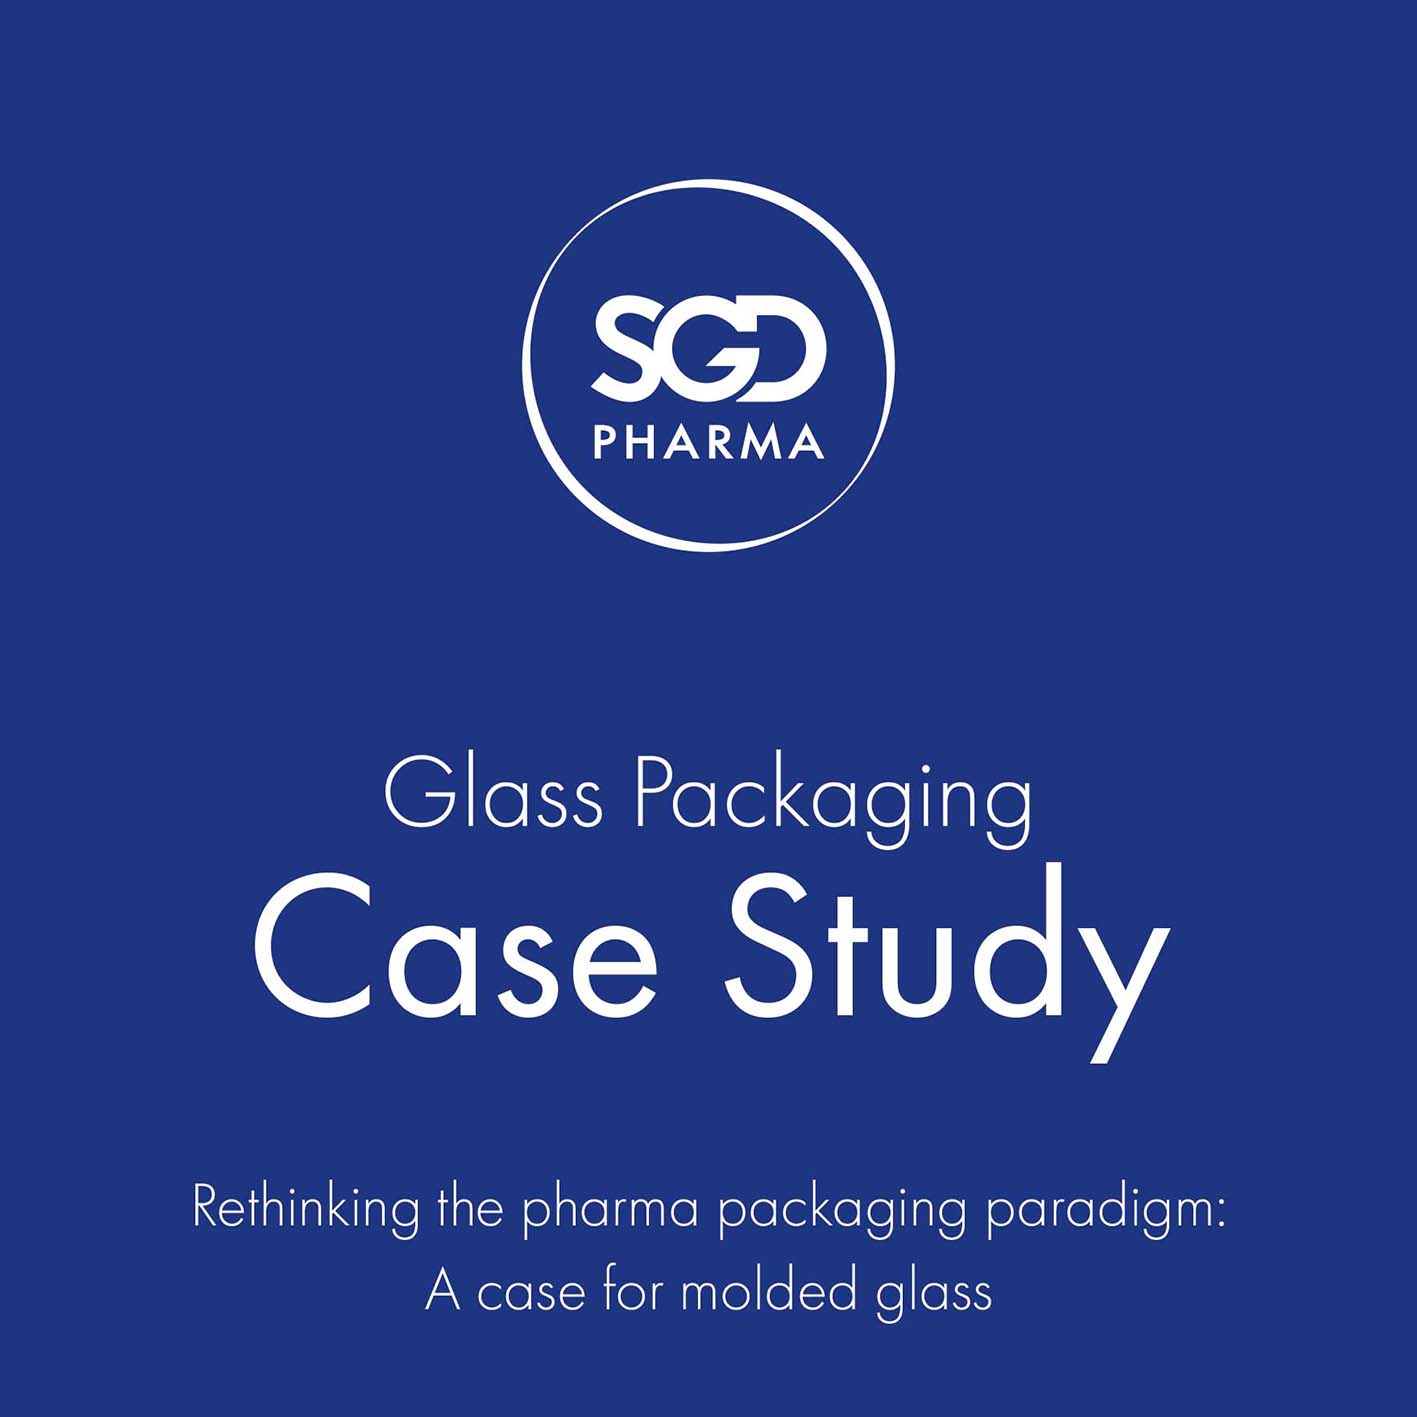 Glass Packaging Case Study